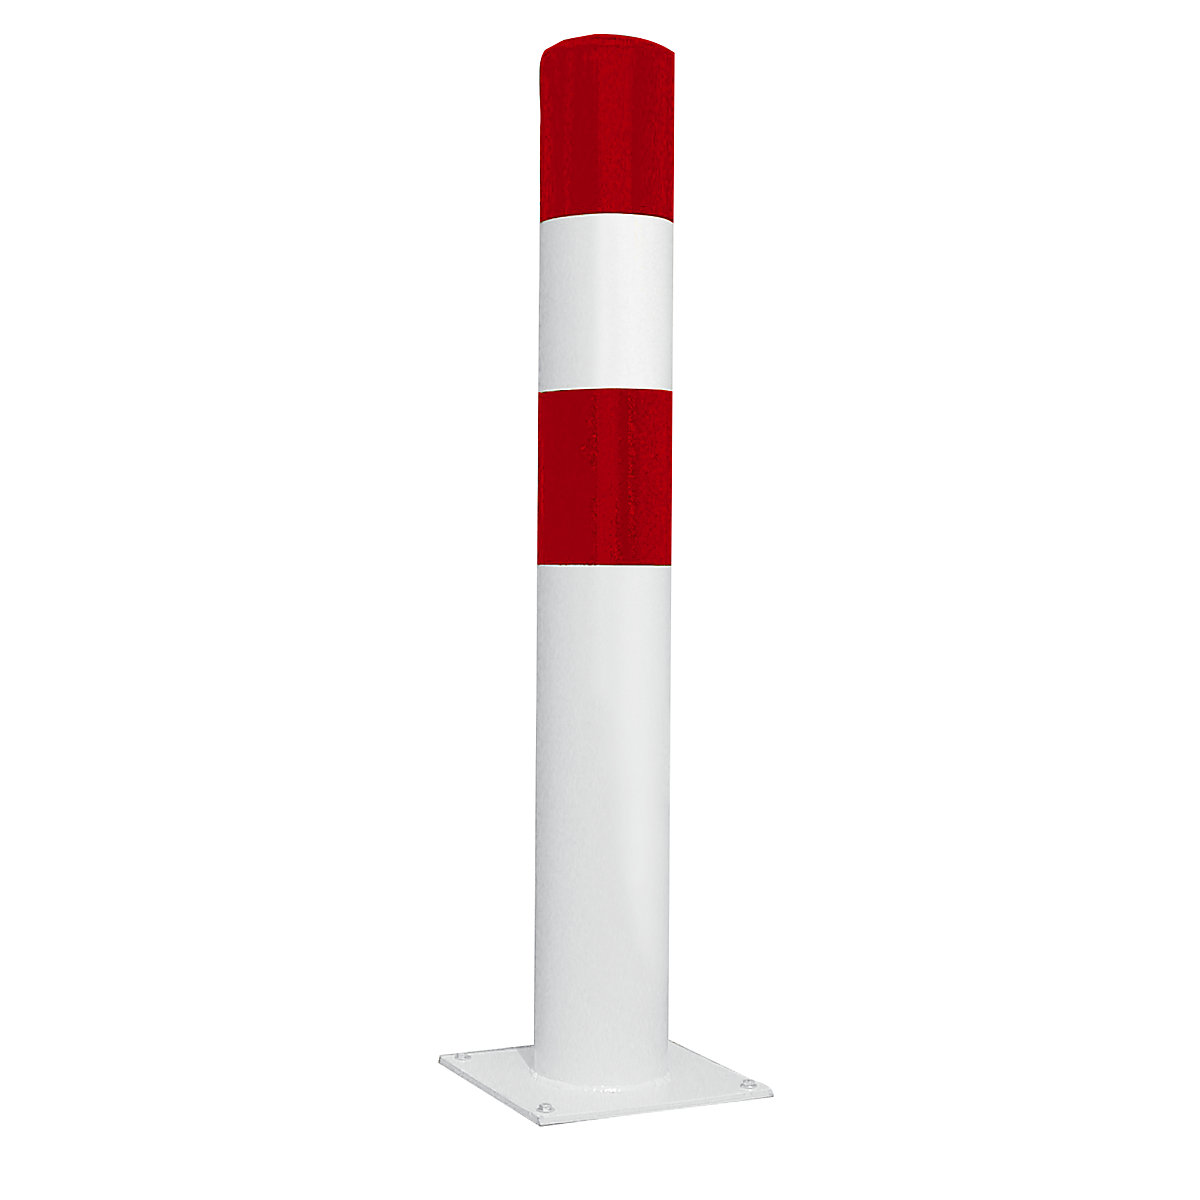 Crash protection bollard, size L, red/white, for bolting in place-2